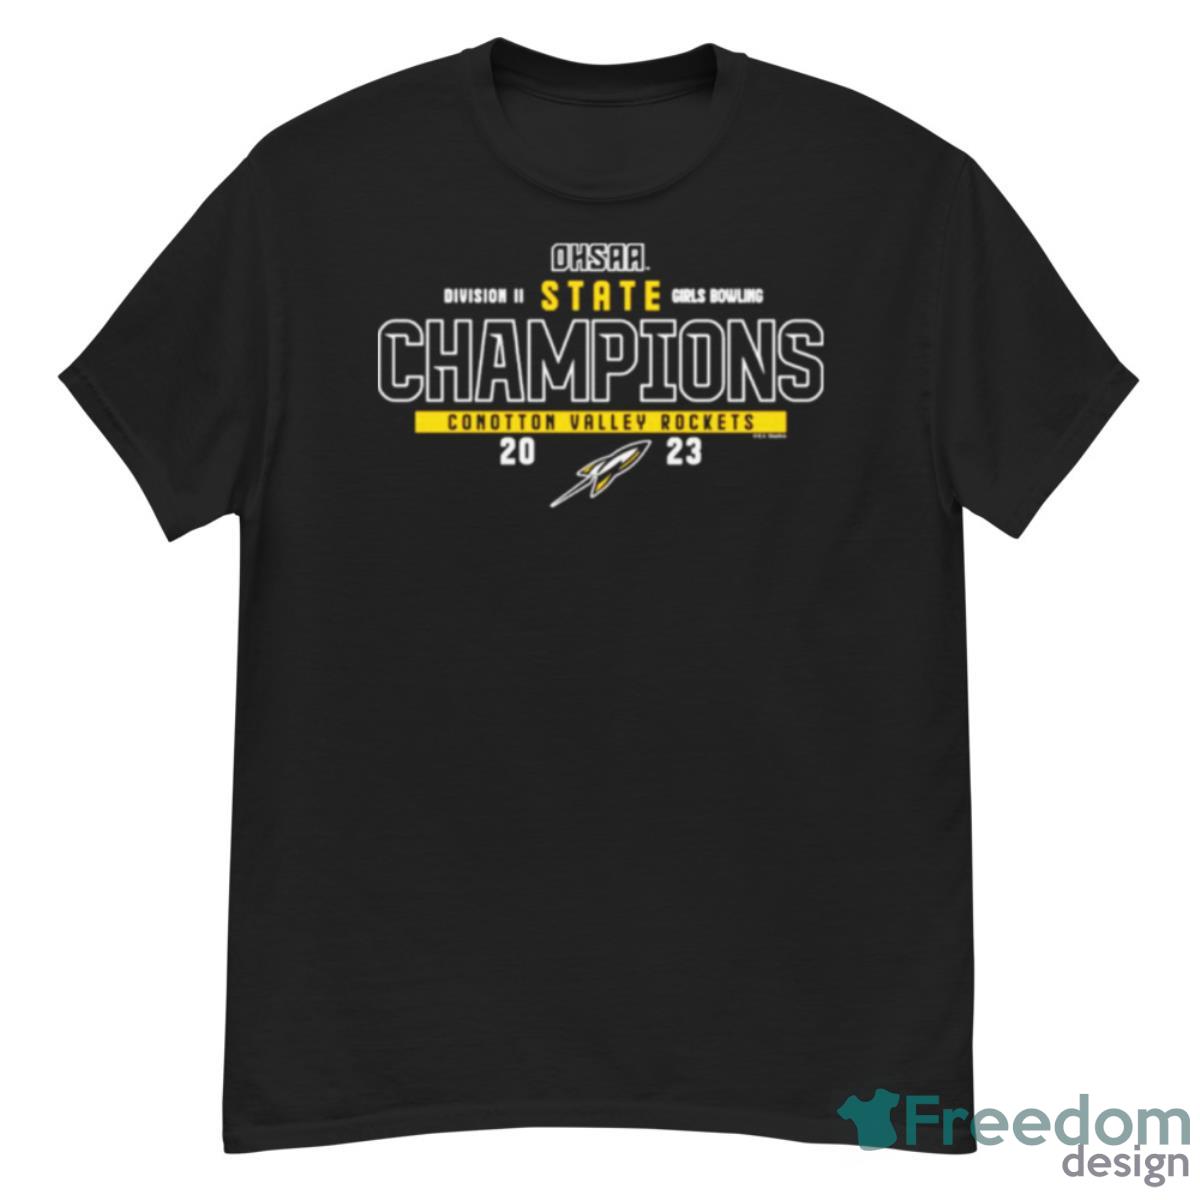 2023 Ohsaa Girls Bowling Division II State Champions Conotton Valley Rockets Shirt - G500 Men’s Classic T-Shirt